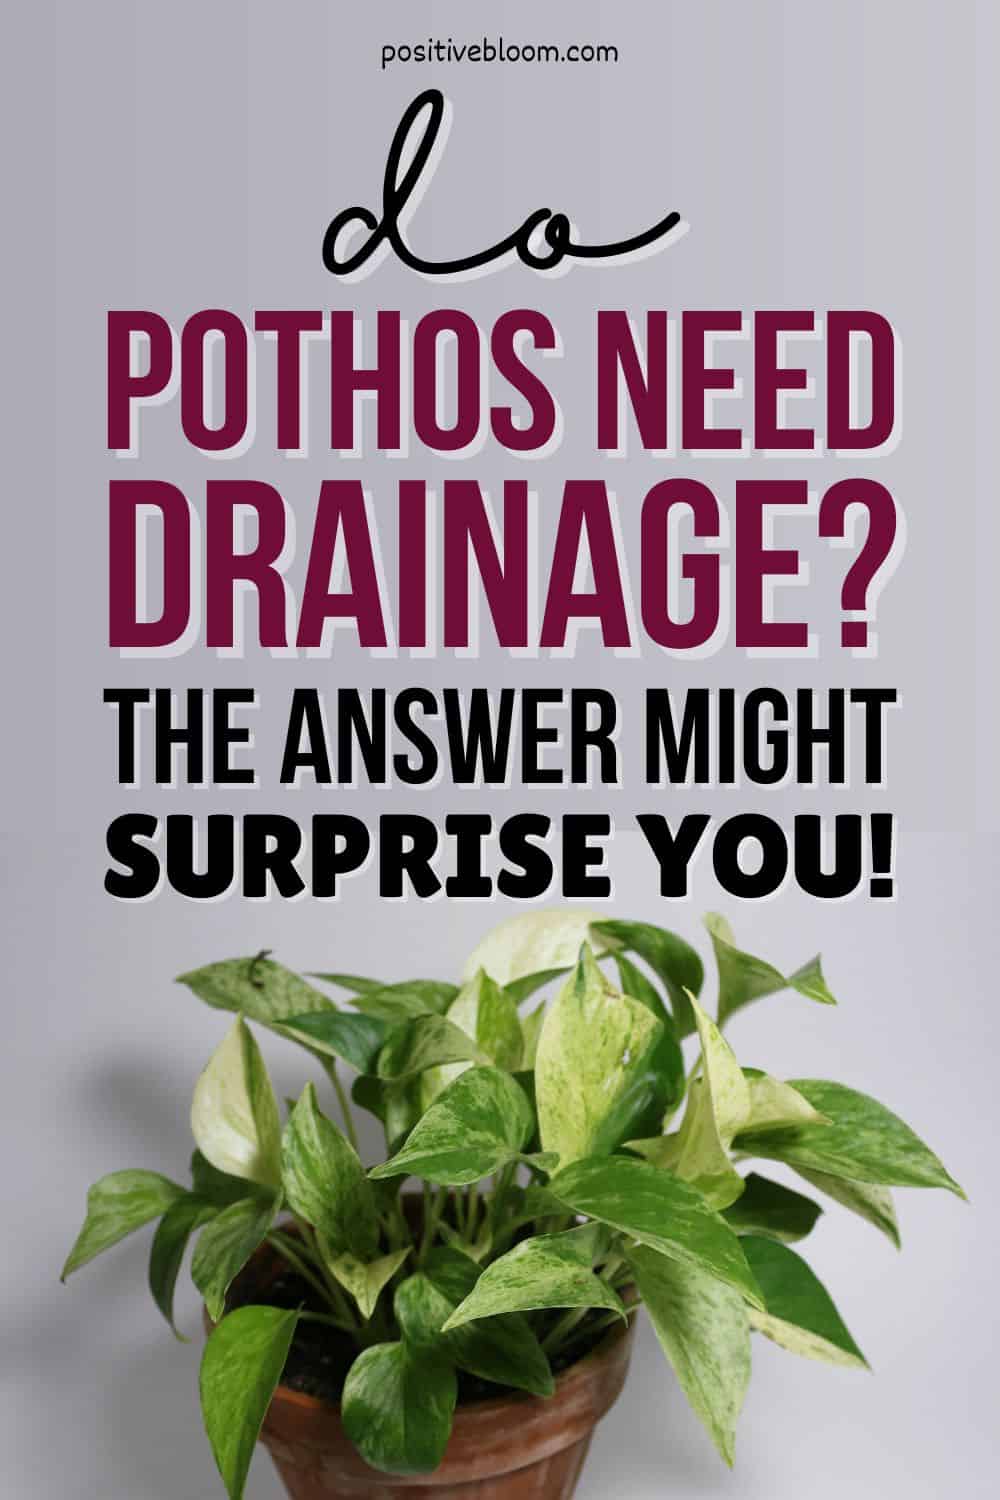 Do Pothos Need Drainage The Answer Might Surprise You! Pinterest